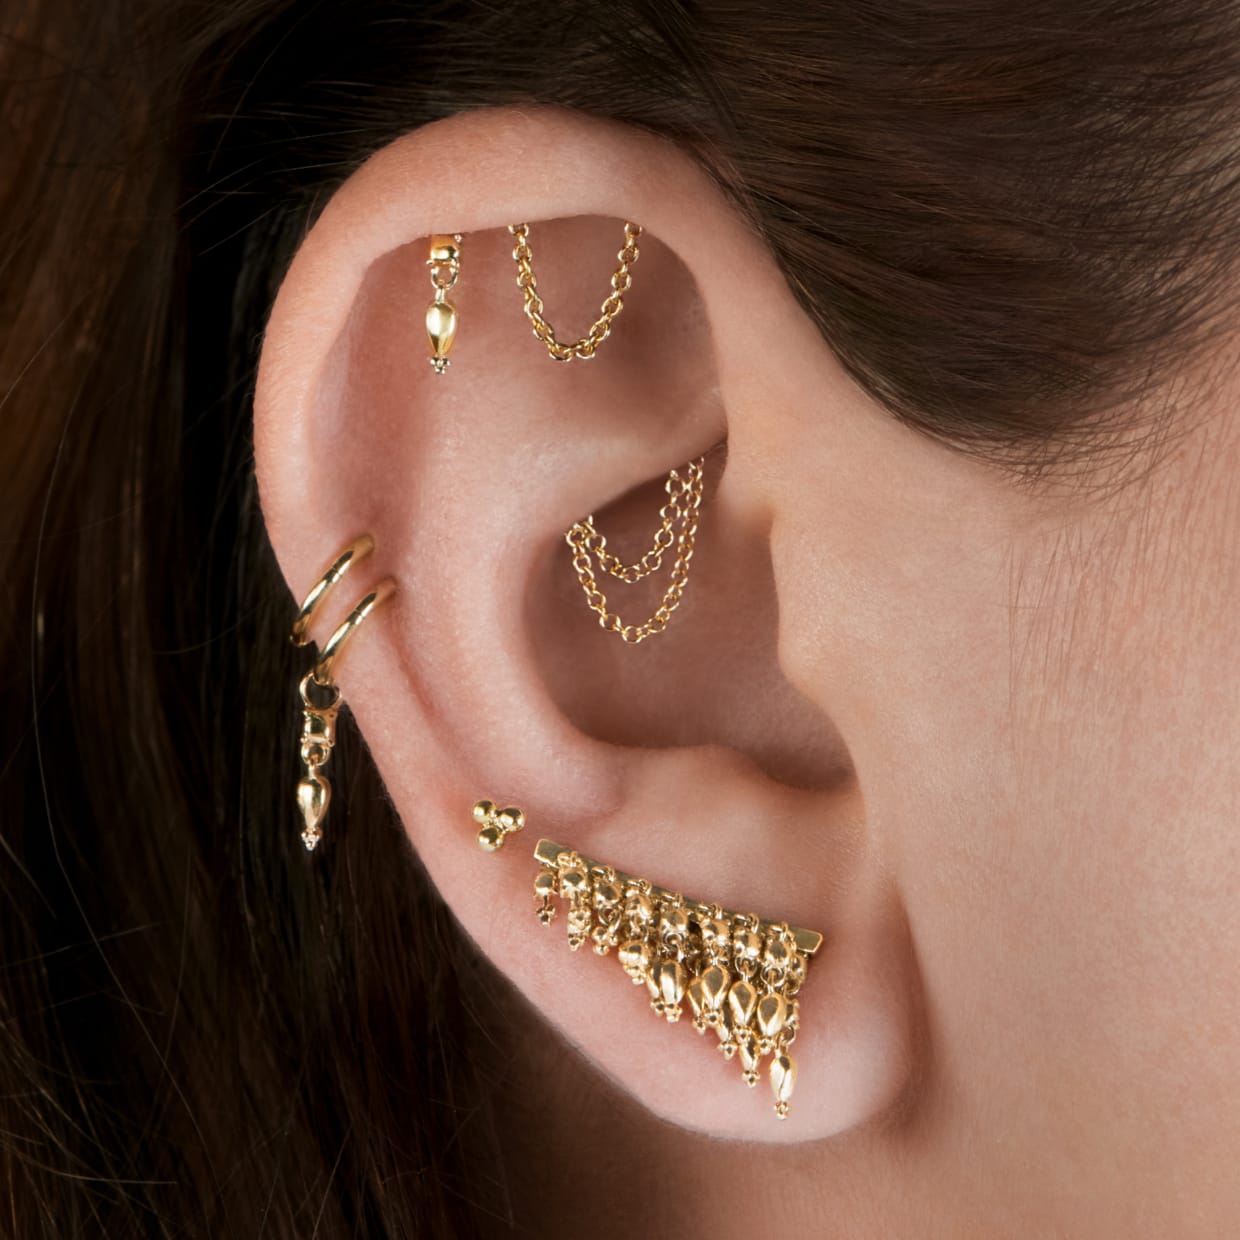 18K gold threaded studs and traditional studs in lobe, cartilage, and Helix piercing placements